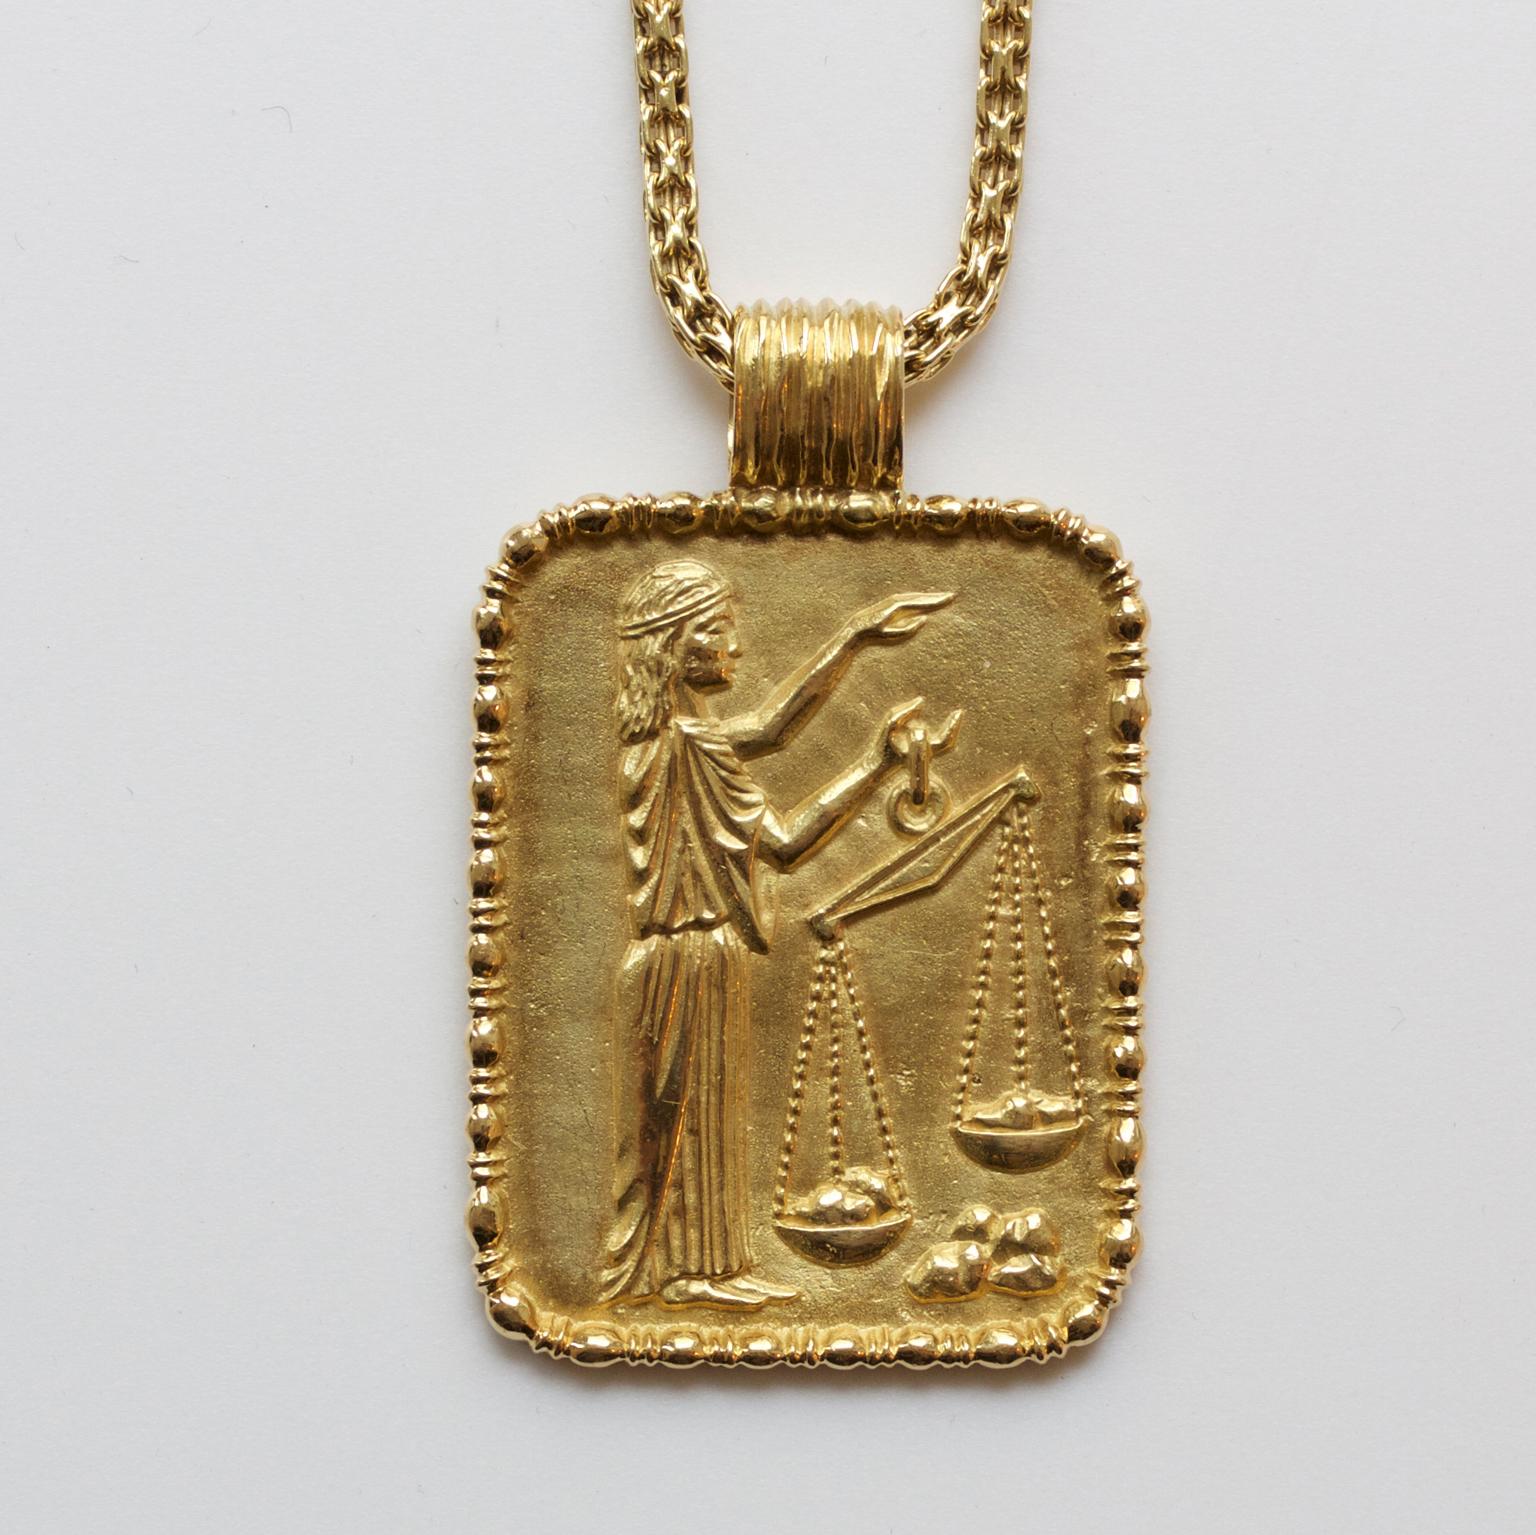 A yellow gold libra pendant, signed: Fred of Paris, circa 1970.

weight: 25.32 gram
dimensions: 4.1 x 3.3 cm
dimensions with hoop: 5 x 3.3 cm

the chain can be added for 2600 eur, the weight of the chain is 40 grams and the length is 91 cm